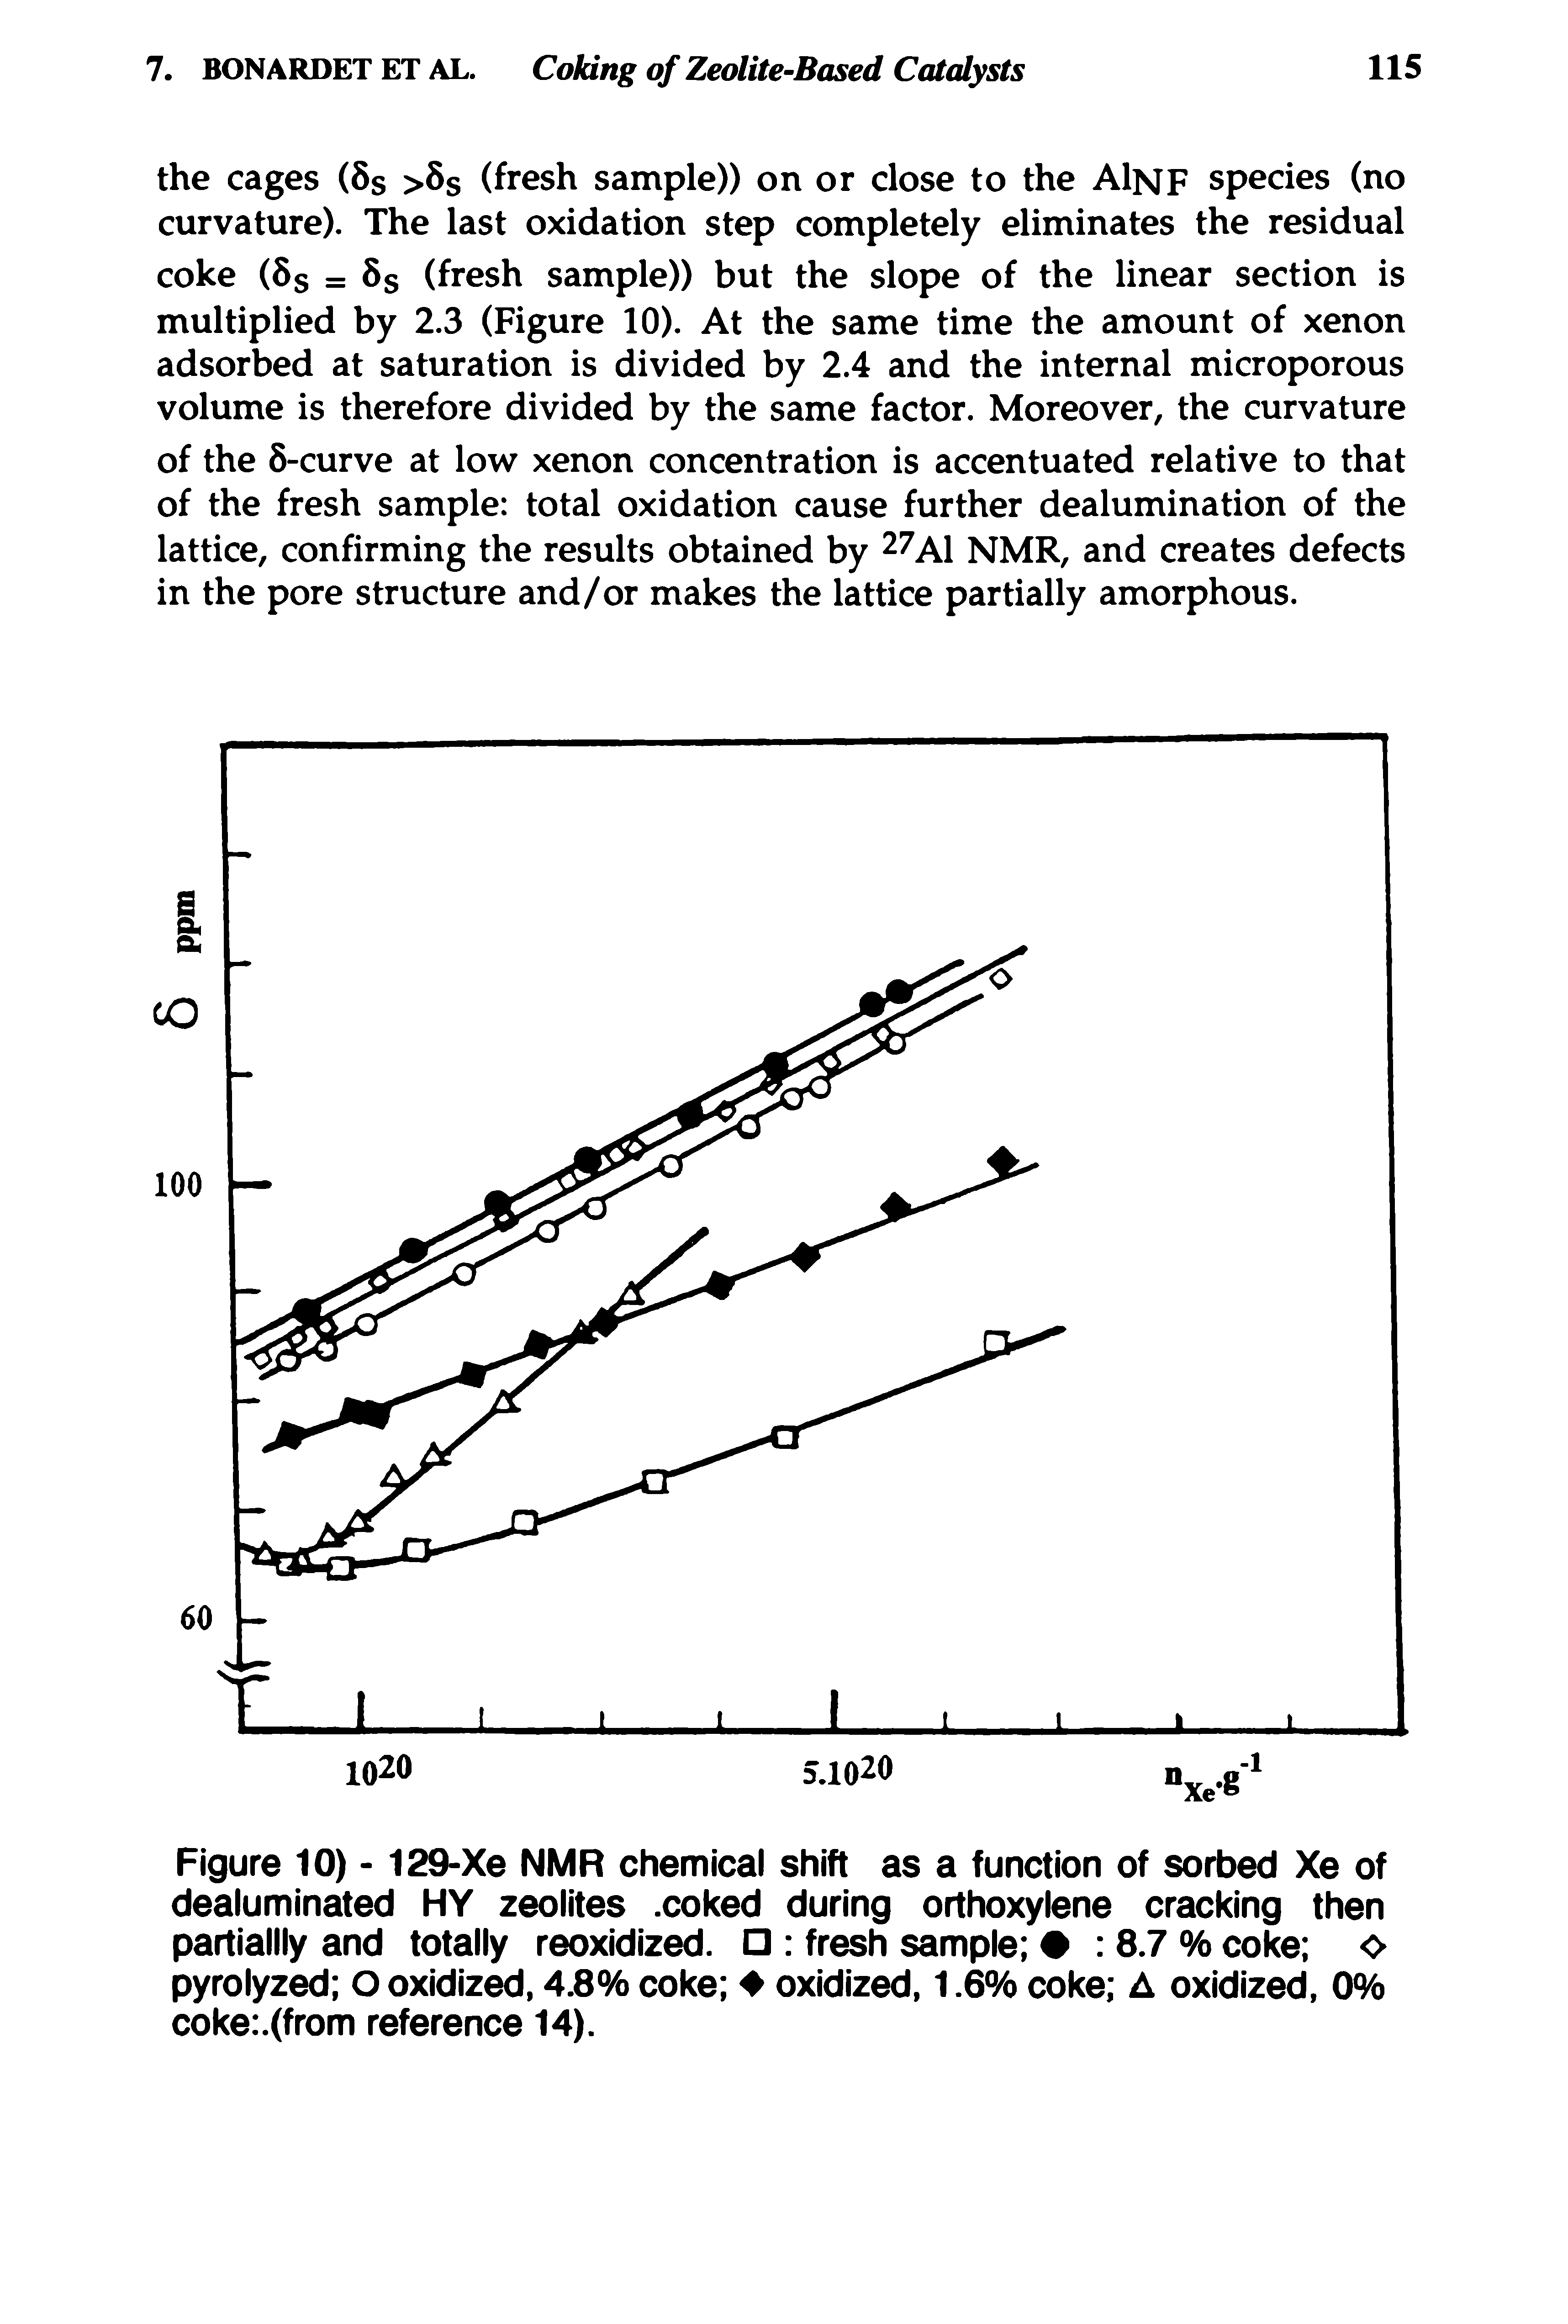 Figure 10) - 129-Xe NMR chemical shift as a function of sorbed Xe of dealuminated HY zeolites. coked during orthoxylene cracking then partiallly and totally reoxidized. fresh sample 8.7 % coke pyrolyzed O oxidized, 4.8% coke oxidized, 1.6% coke A oxidized, 0% coke .(from reference 14).